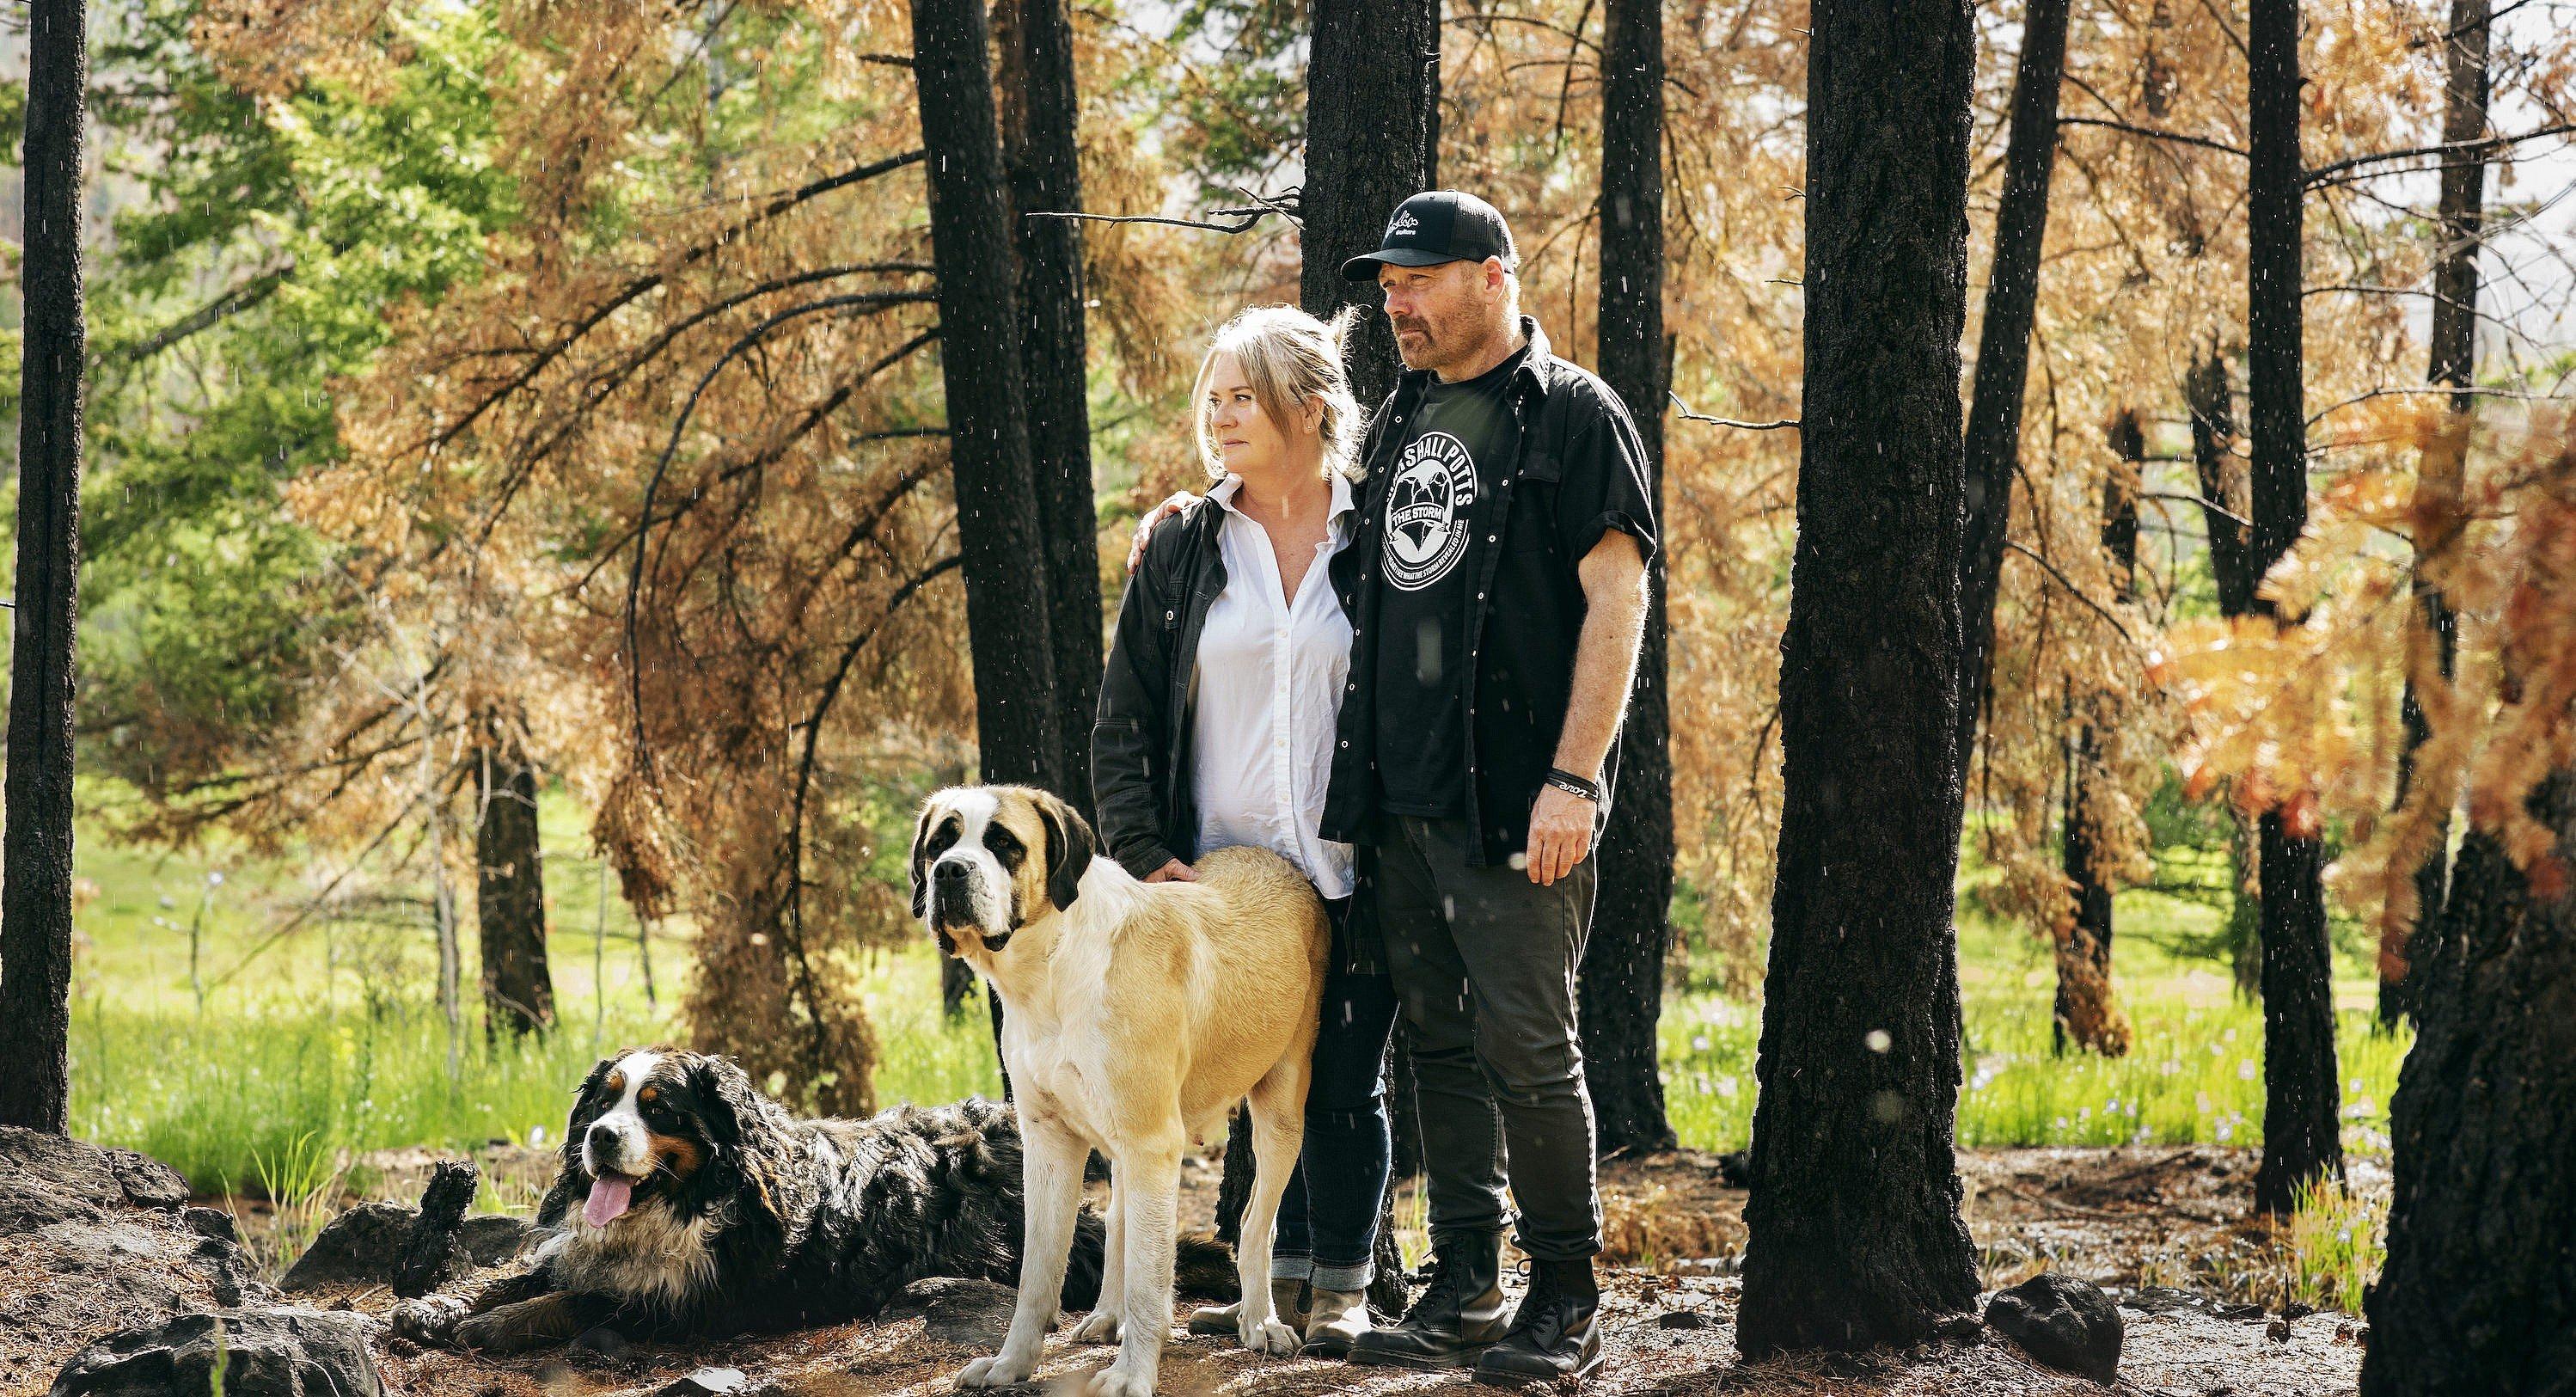 A home in ruins: Jo-Anne Beharrell and Marshall Potts loved the woodland landscape where they built their house. Today, half the trees are gone.